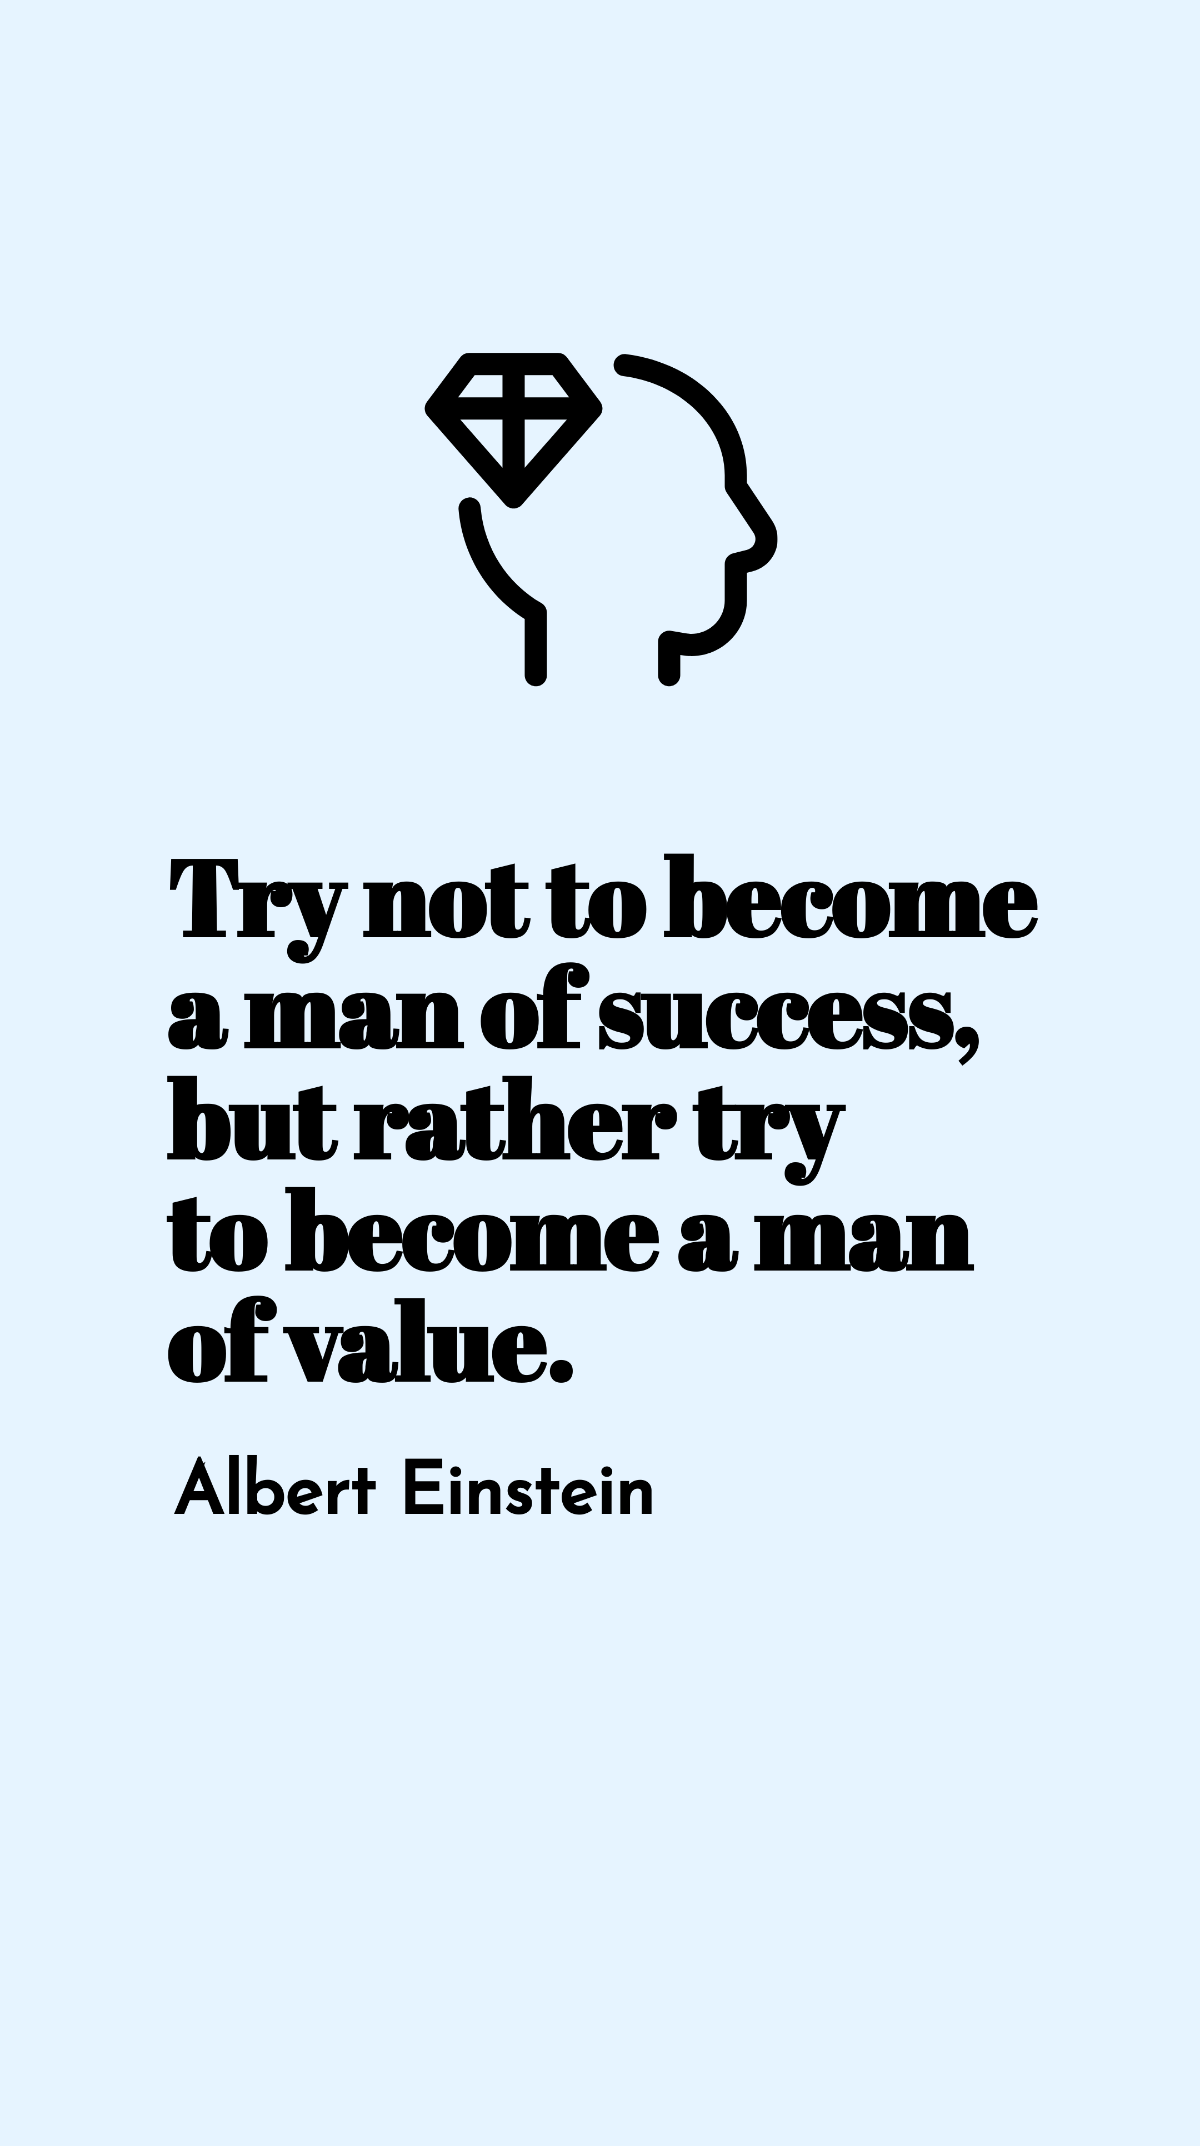 Albert Einstein - Try not to become a man of success, but rather try to become a man of value. Template